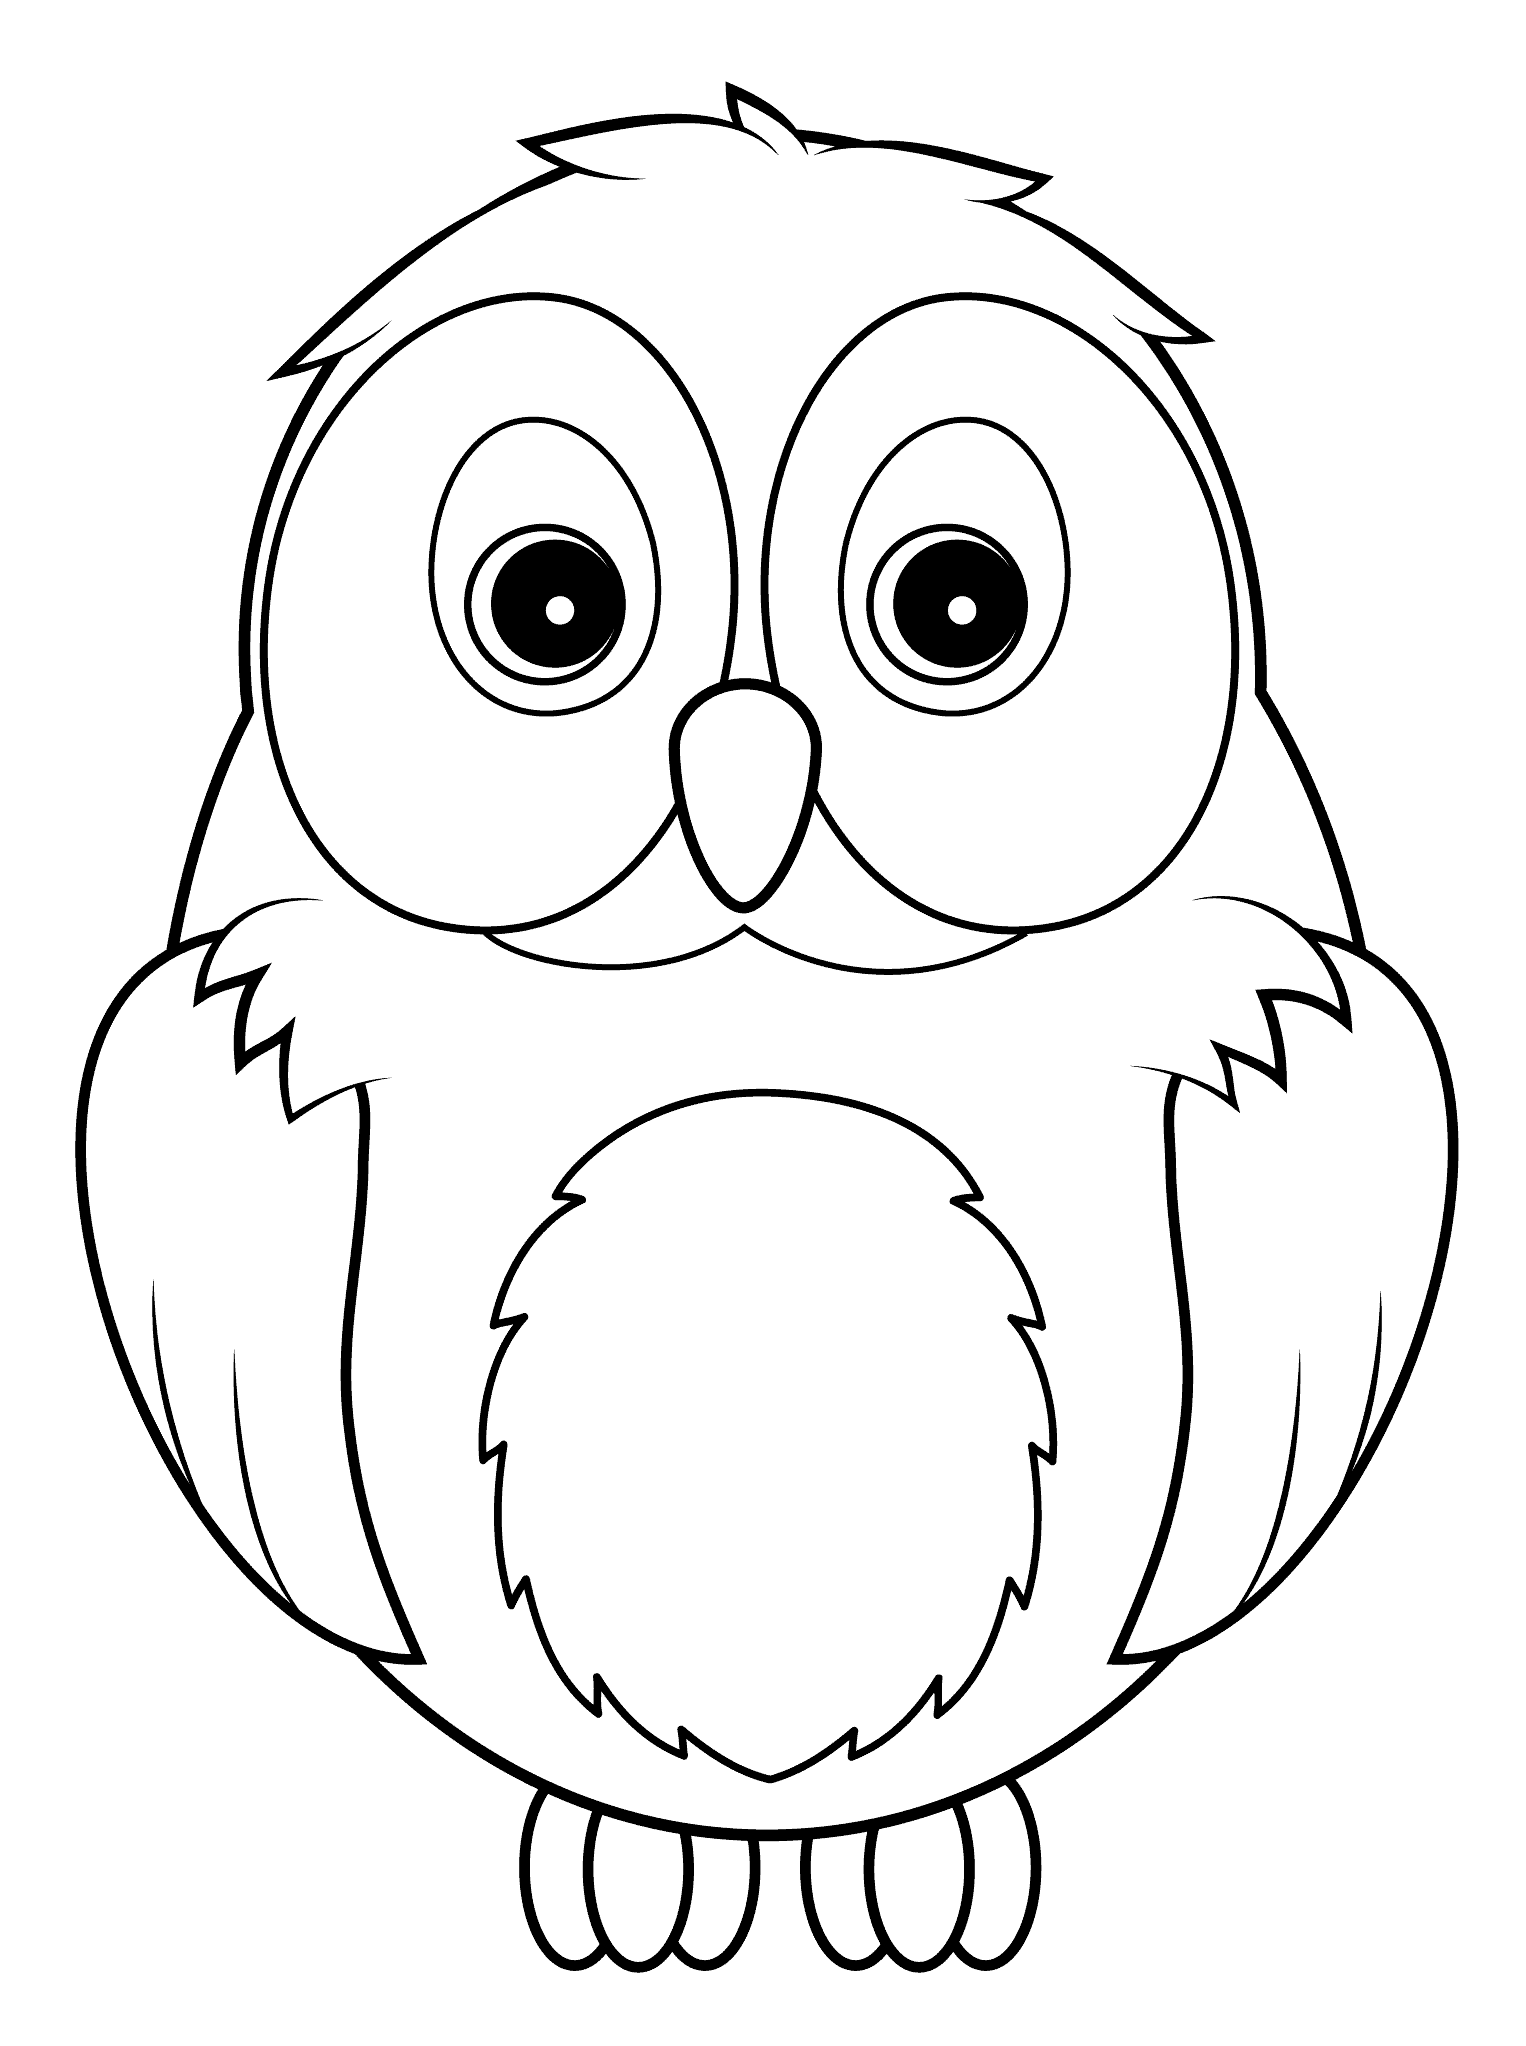 Cute Little Owl Coloring Page